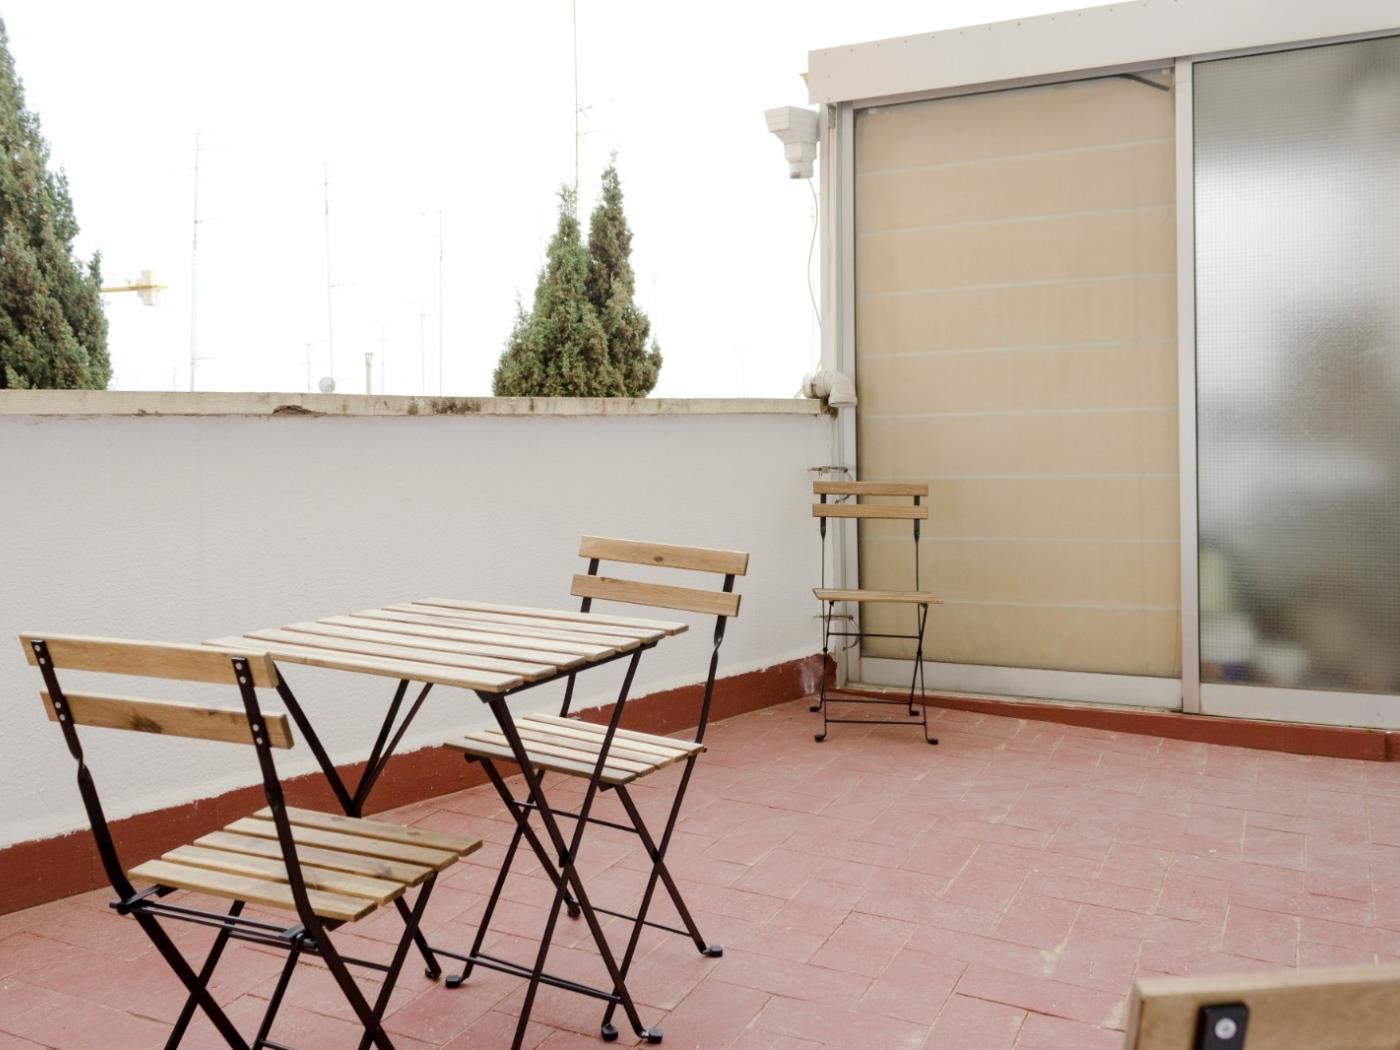 Charming 4 bedroom apartment near Park Guell - My Space Barcelona Apartments